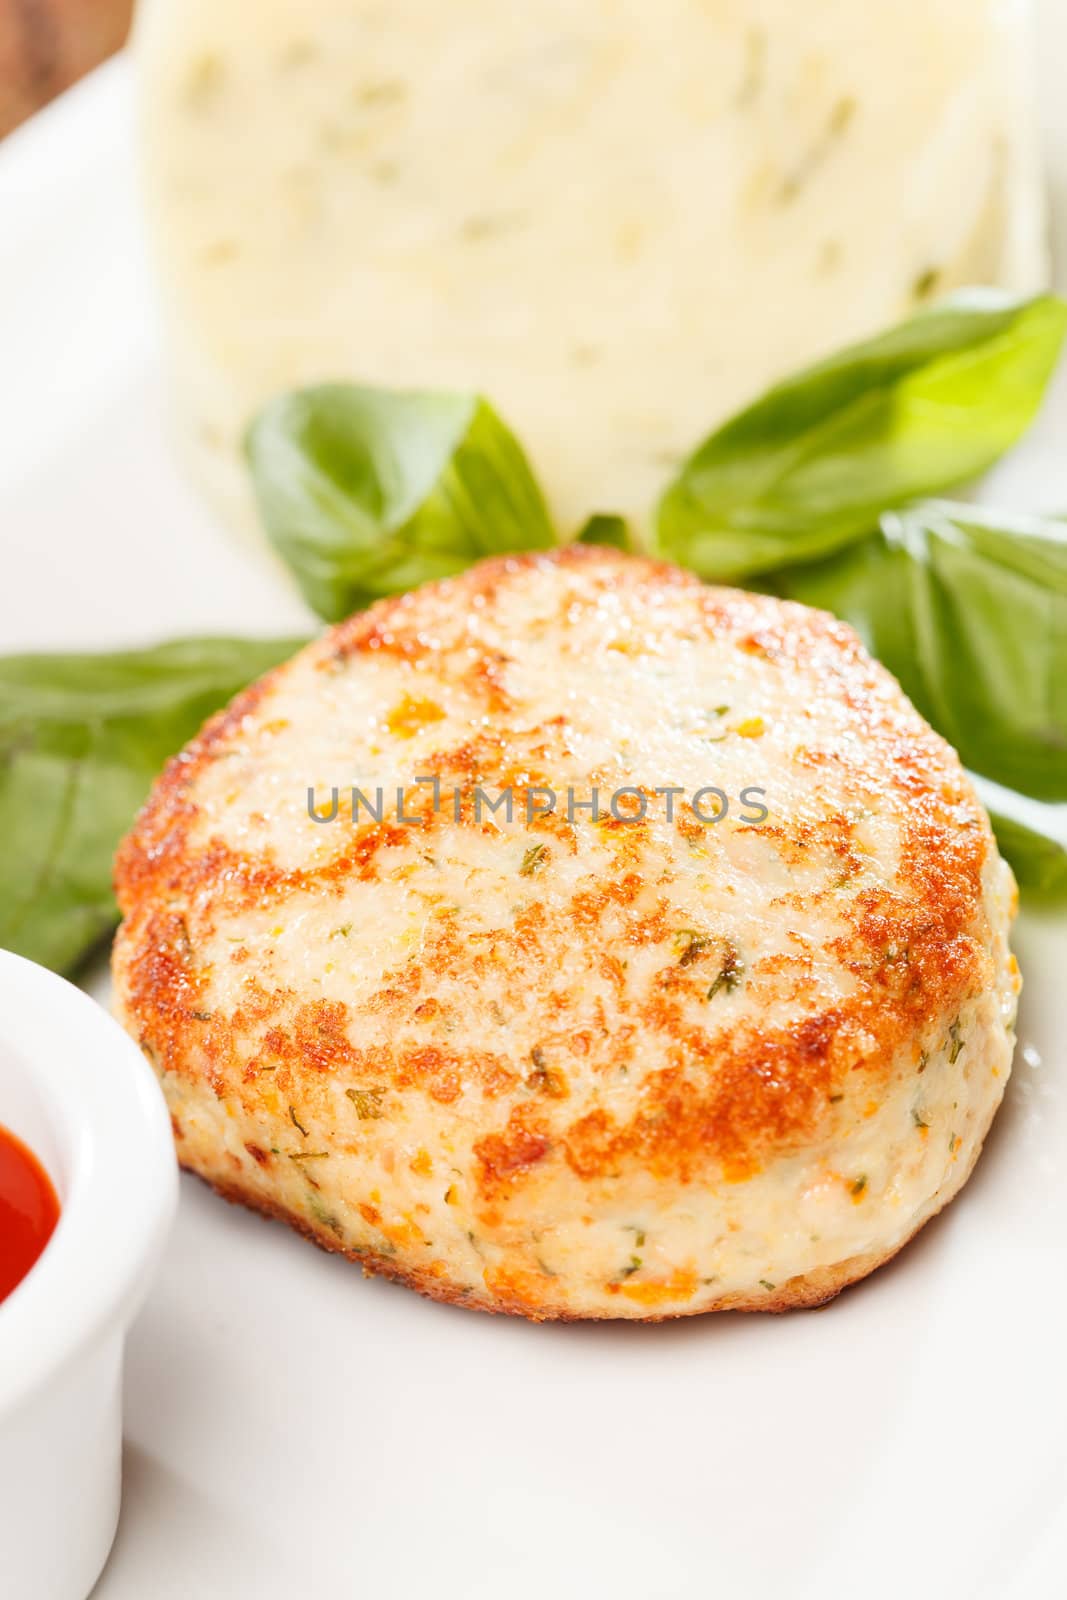 Meat cutlet with mashed potatoes  by shebeko